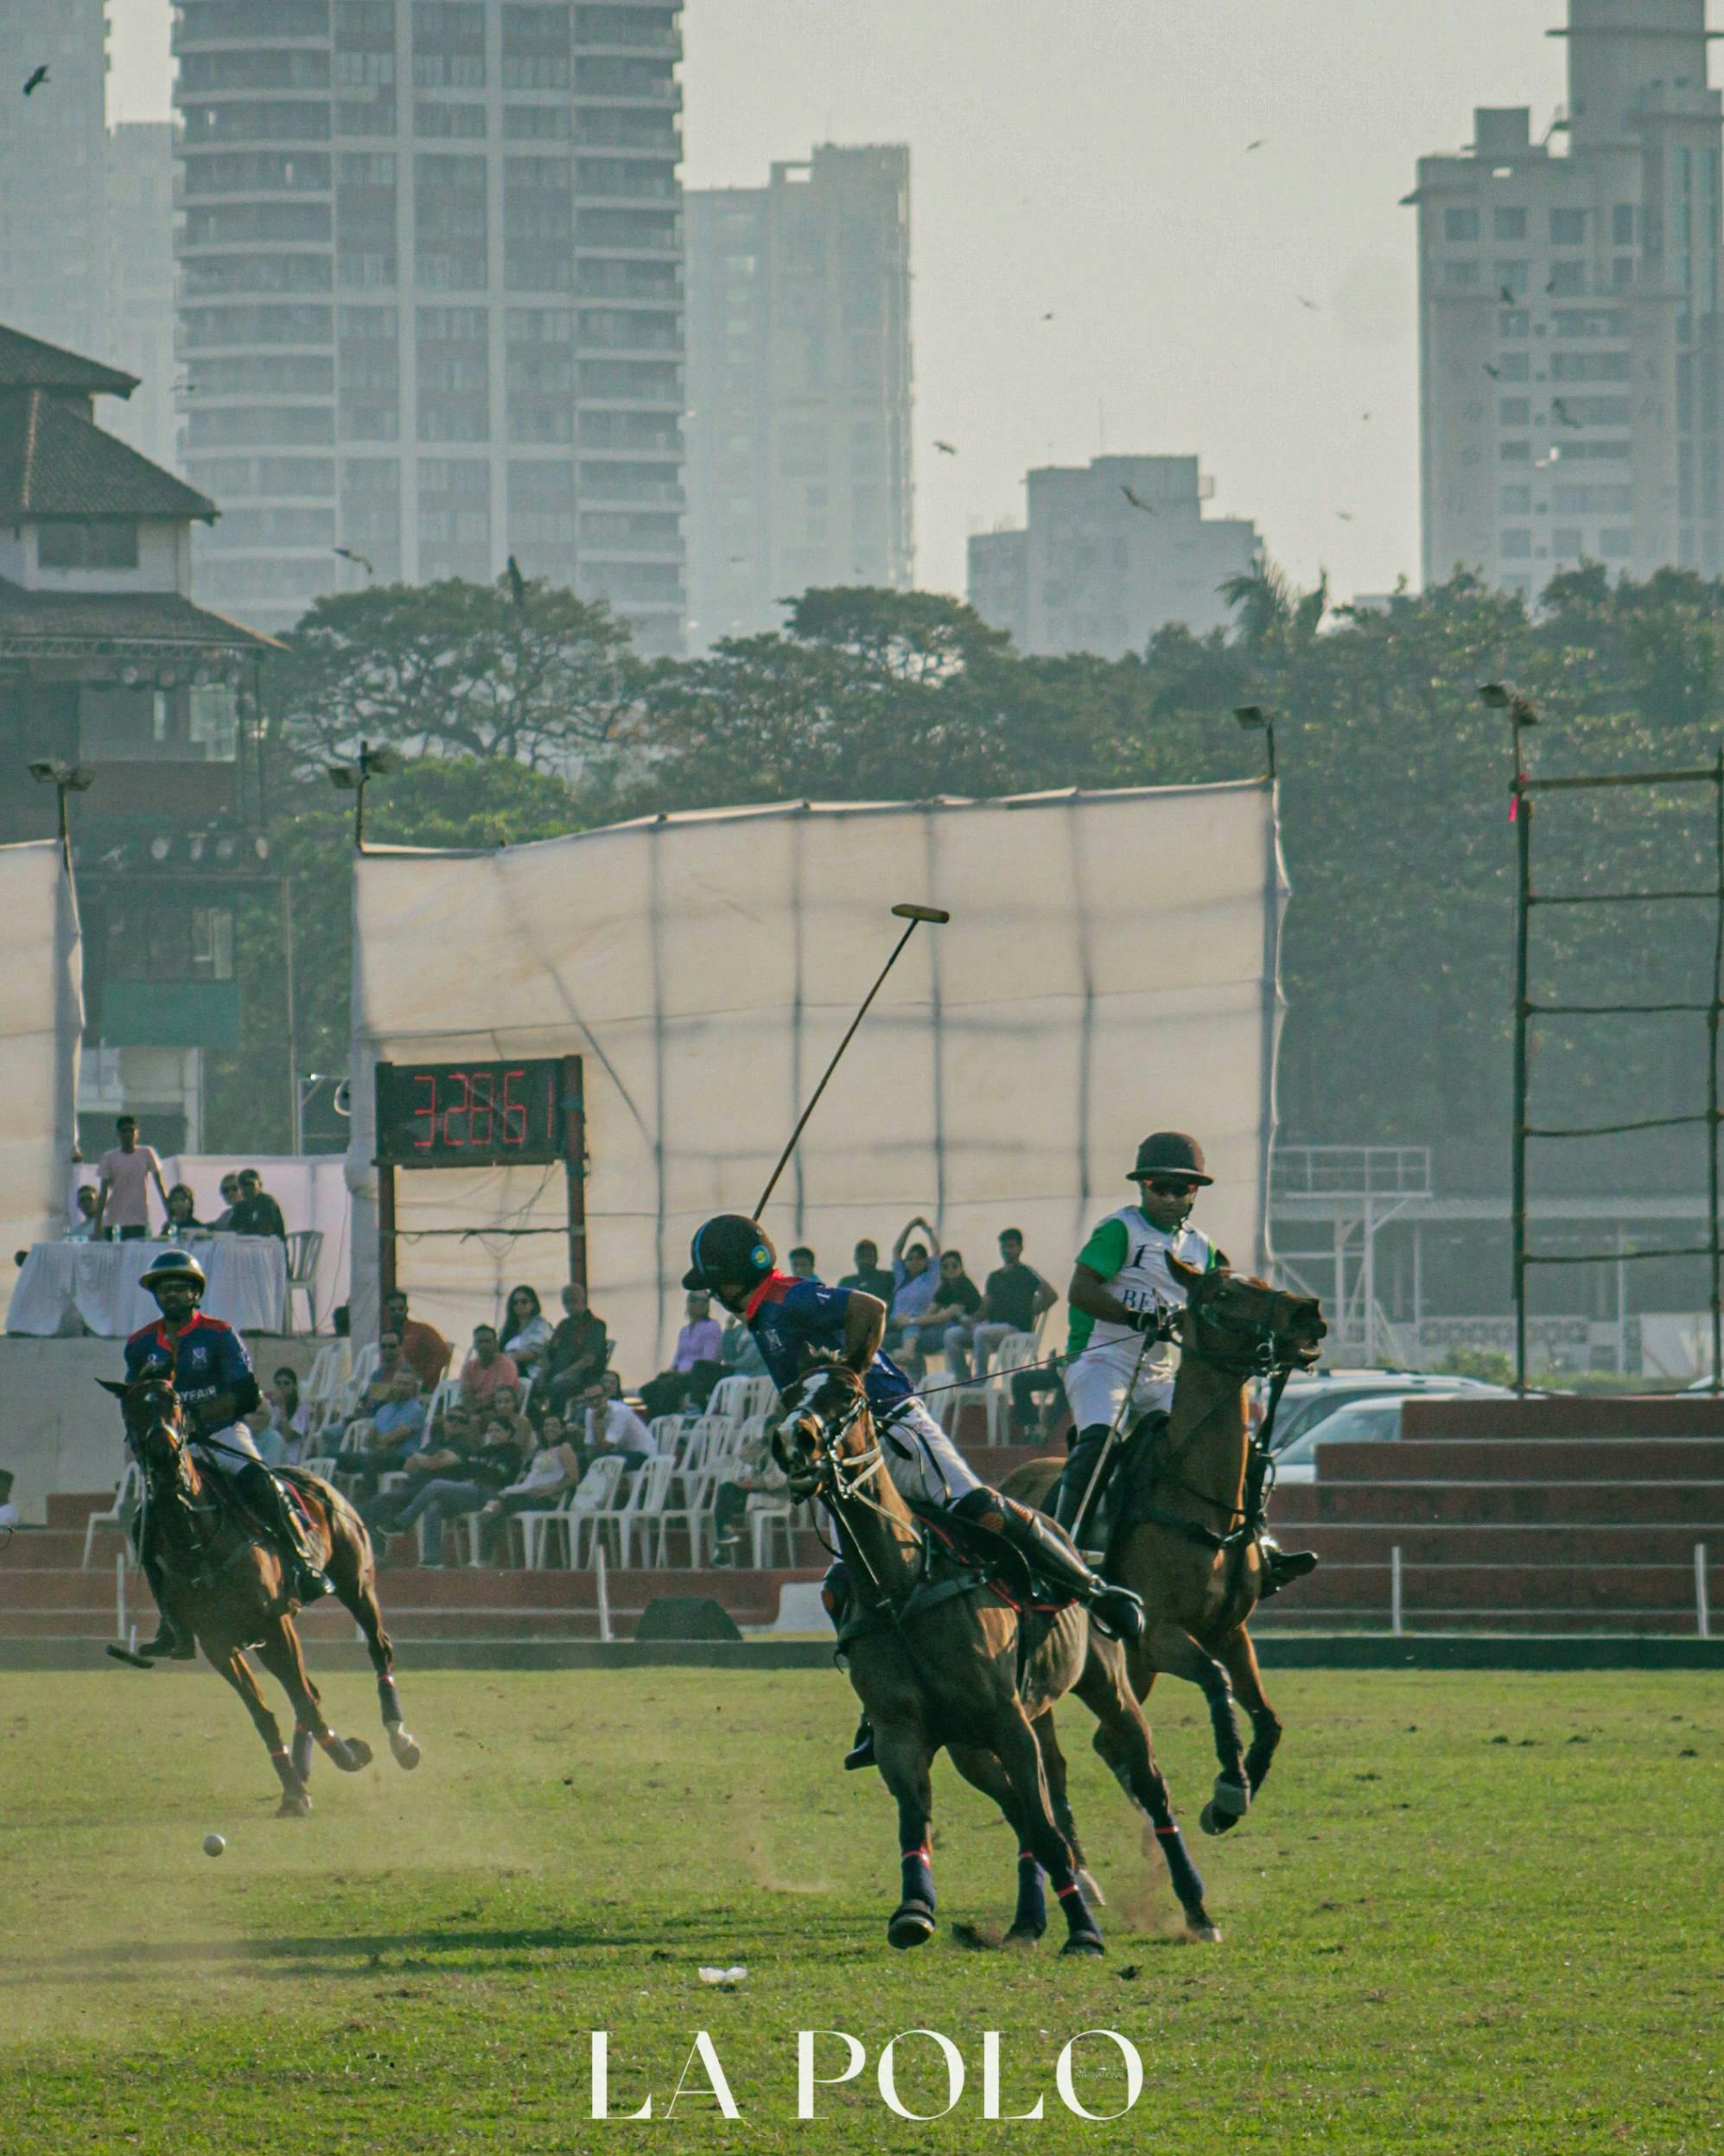 The determination of the polo players is evident in their every move.